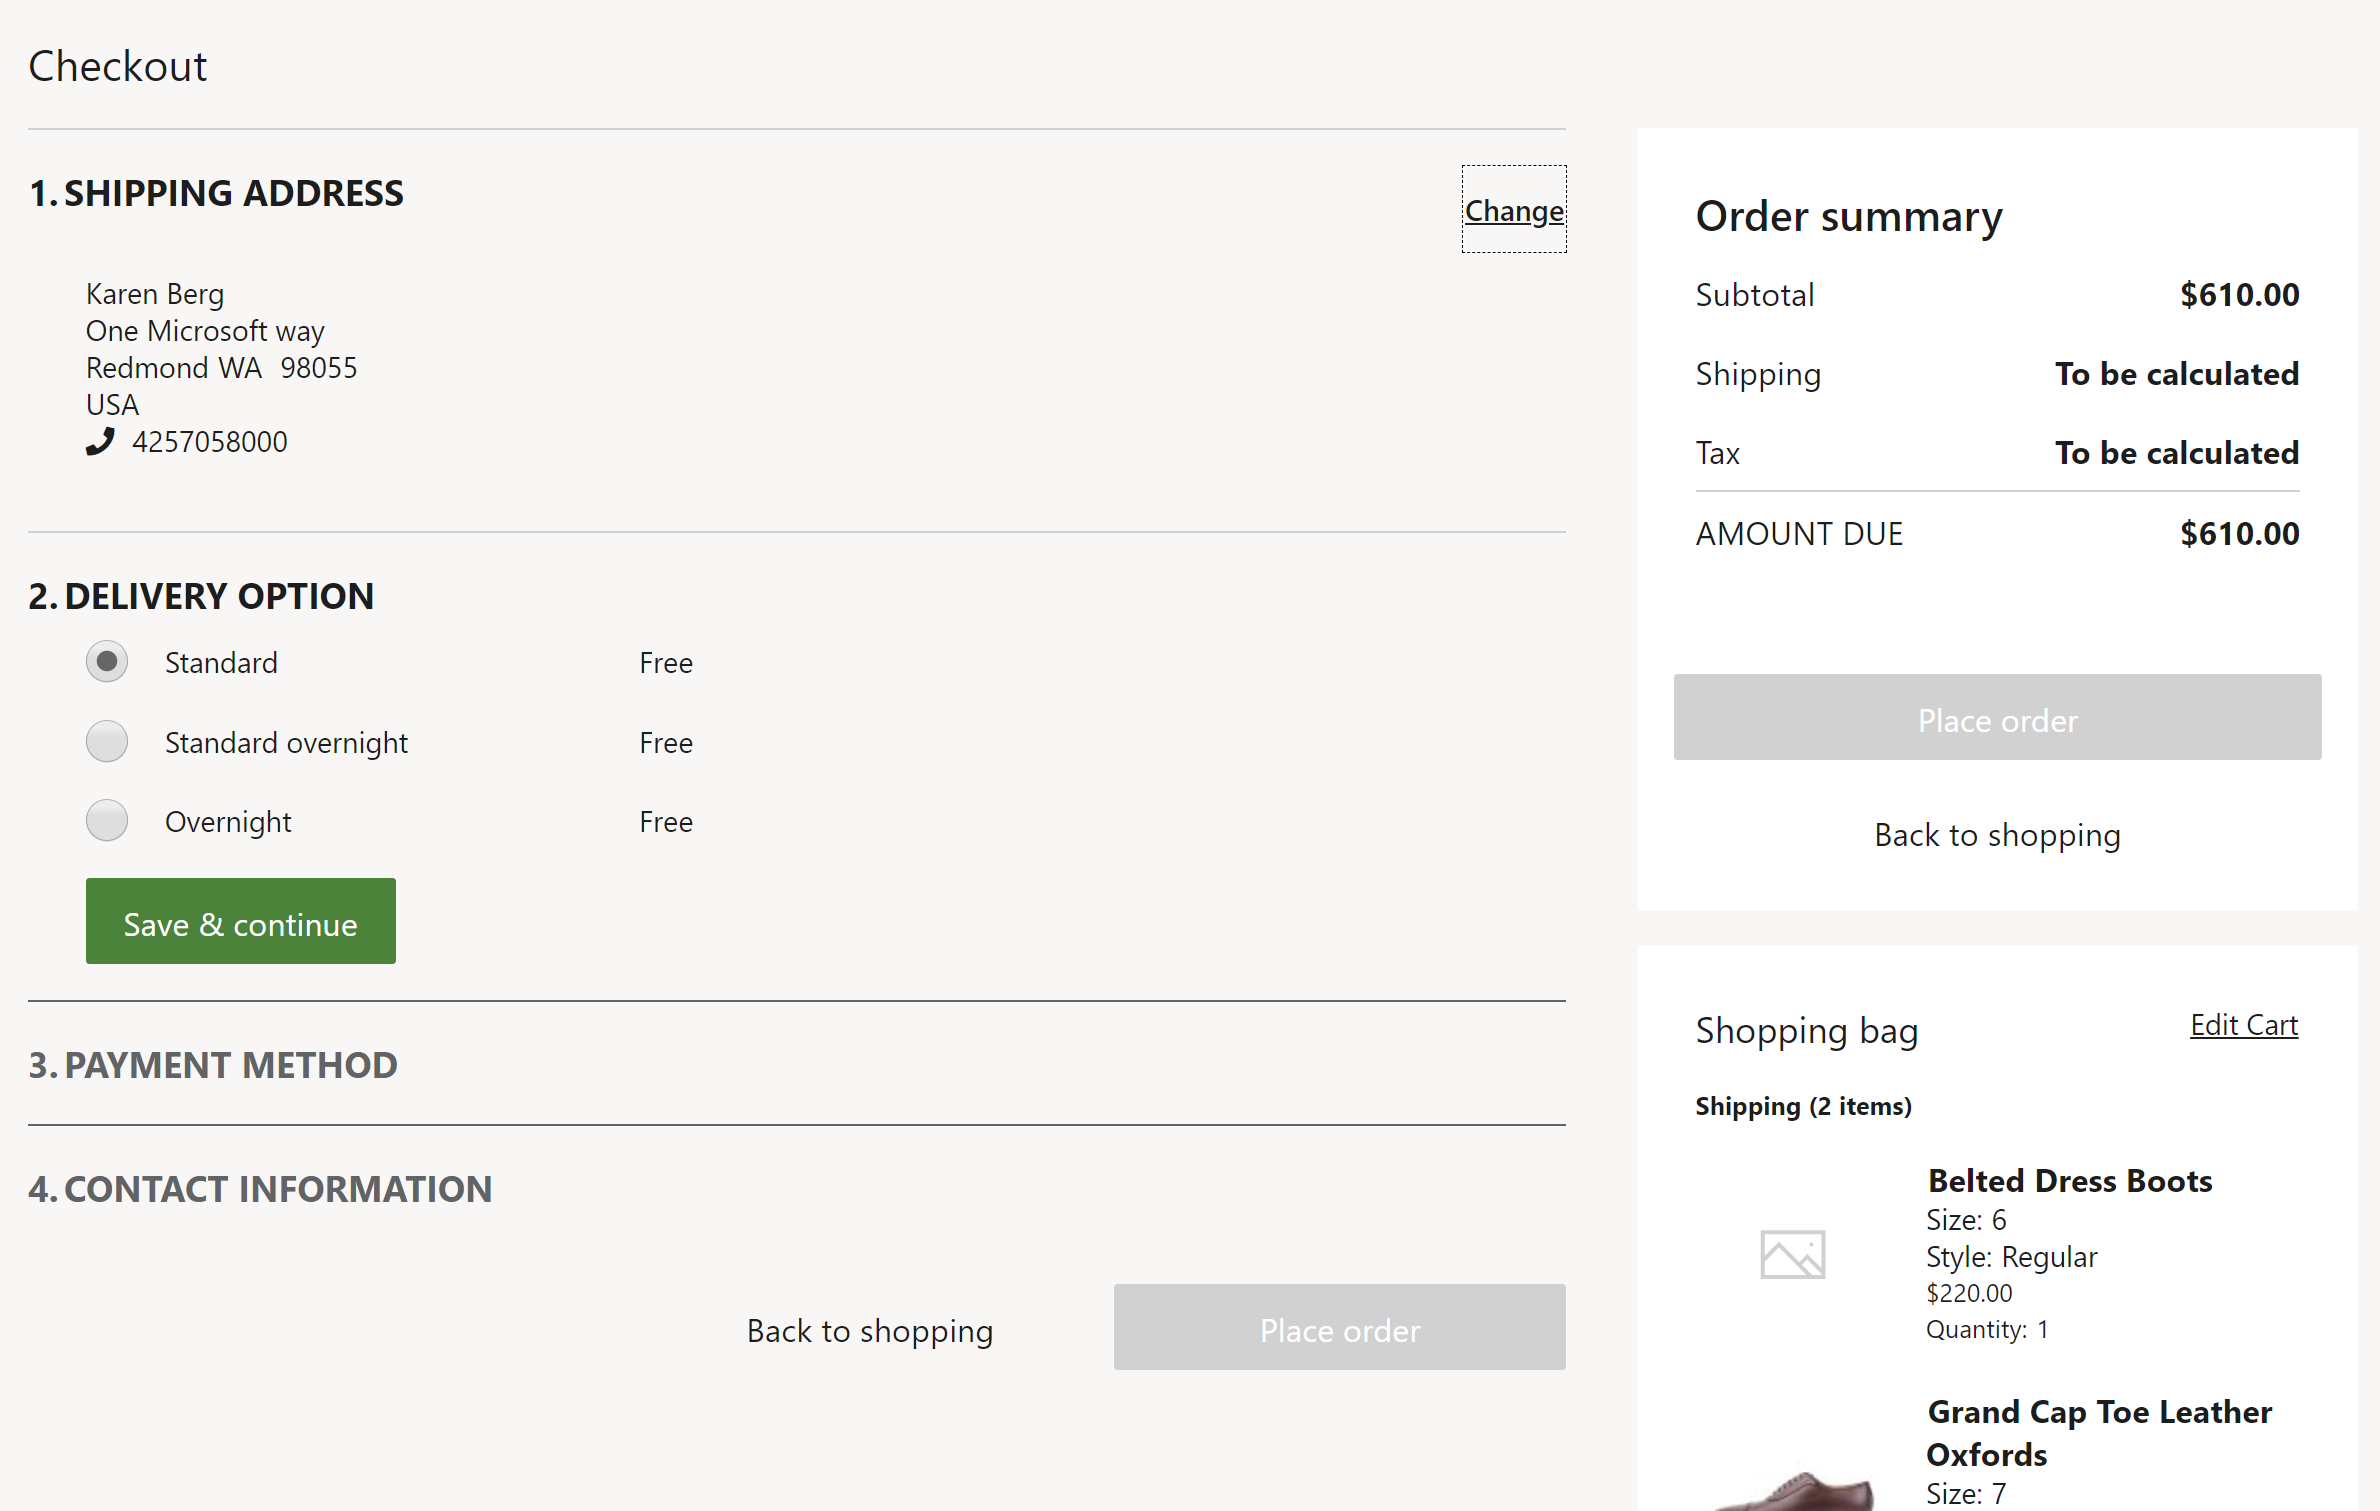 Example of a delivery options module on a checkout page.